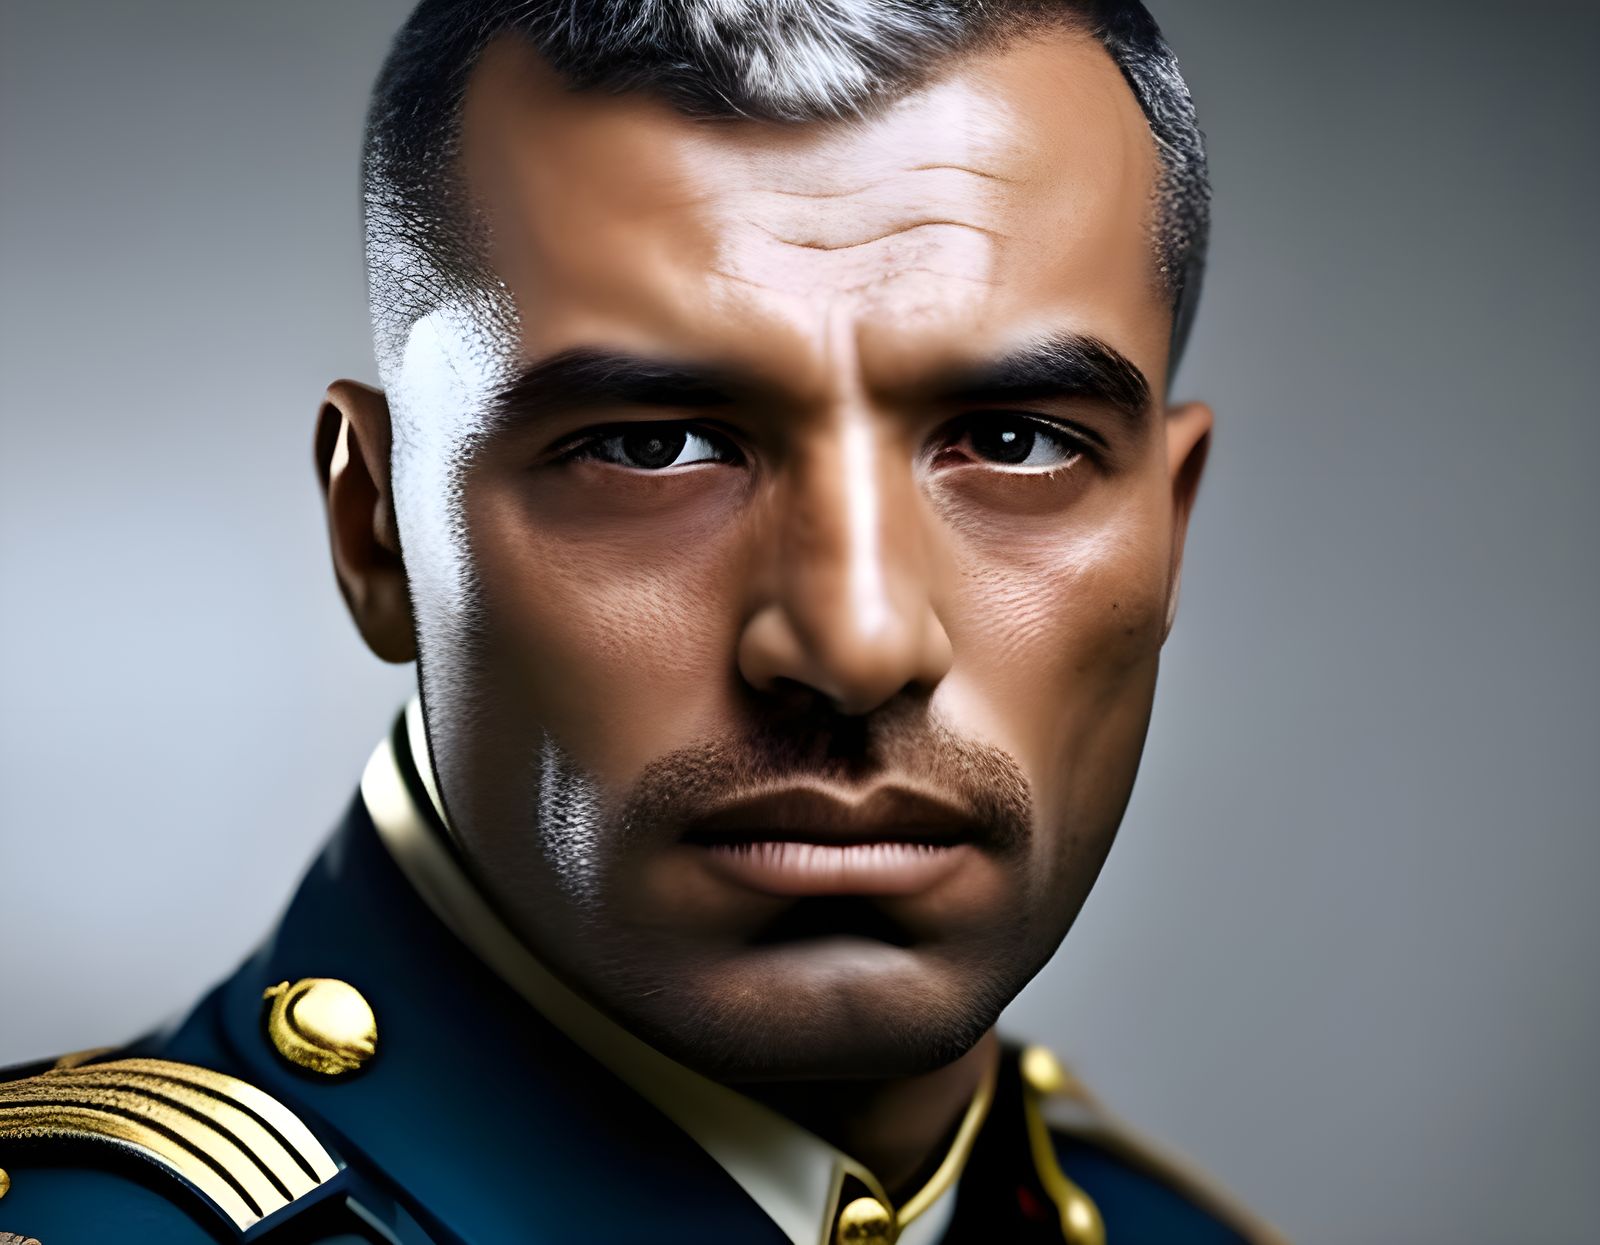 The classified portrait of the Brigadier General